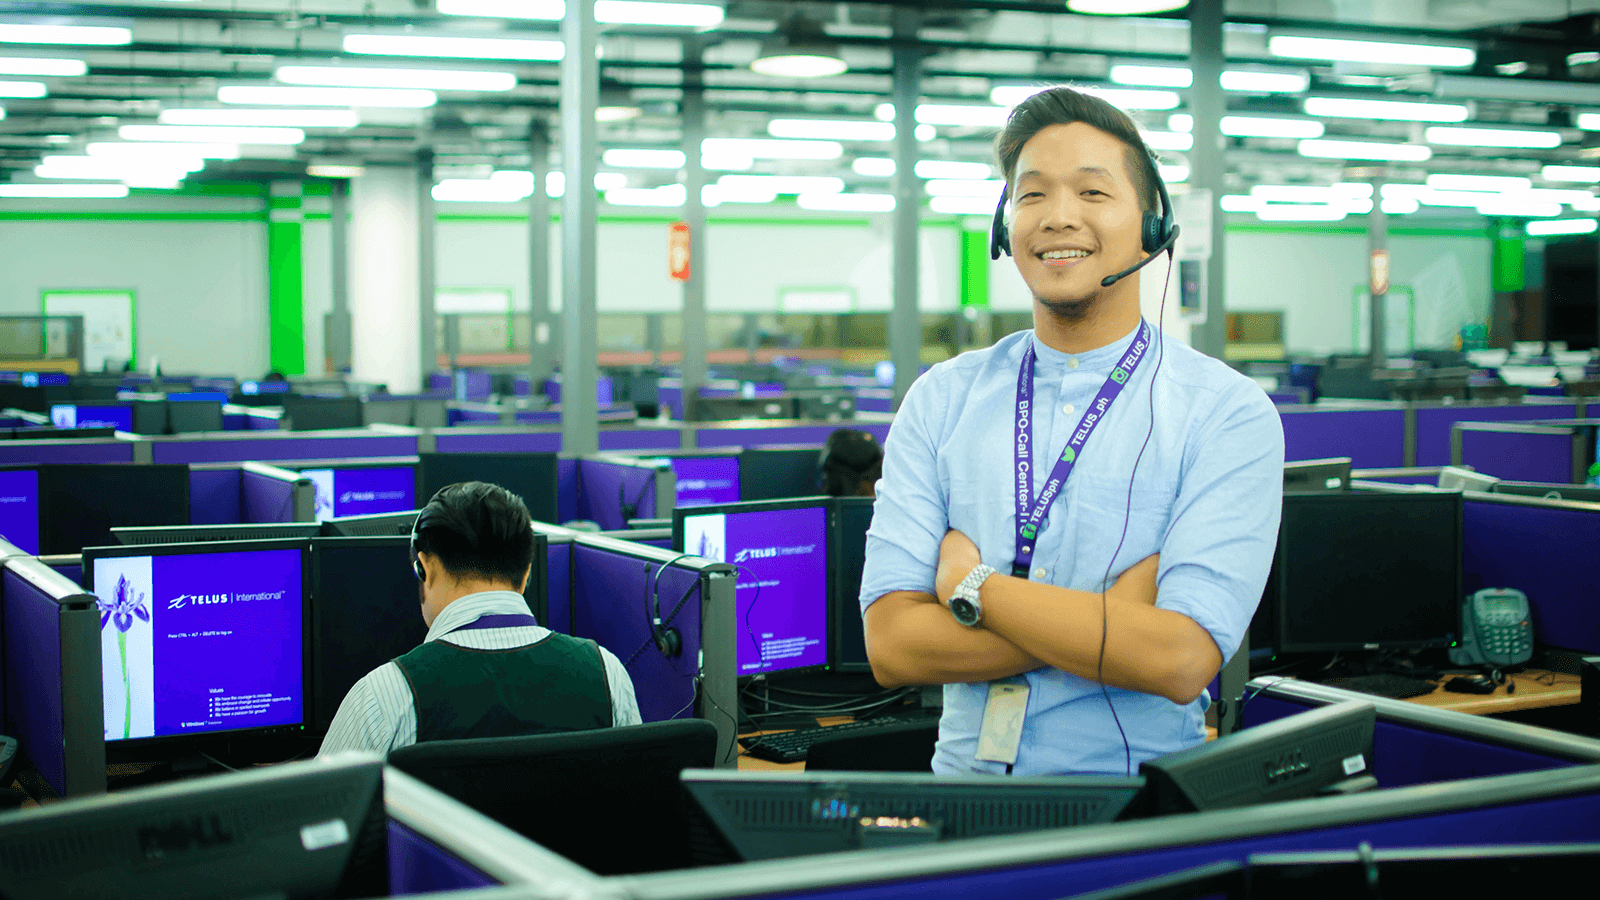 Call centre employee standing by his desk